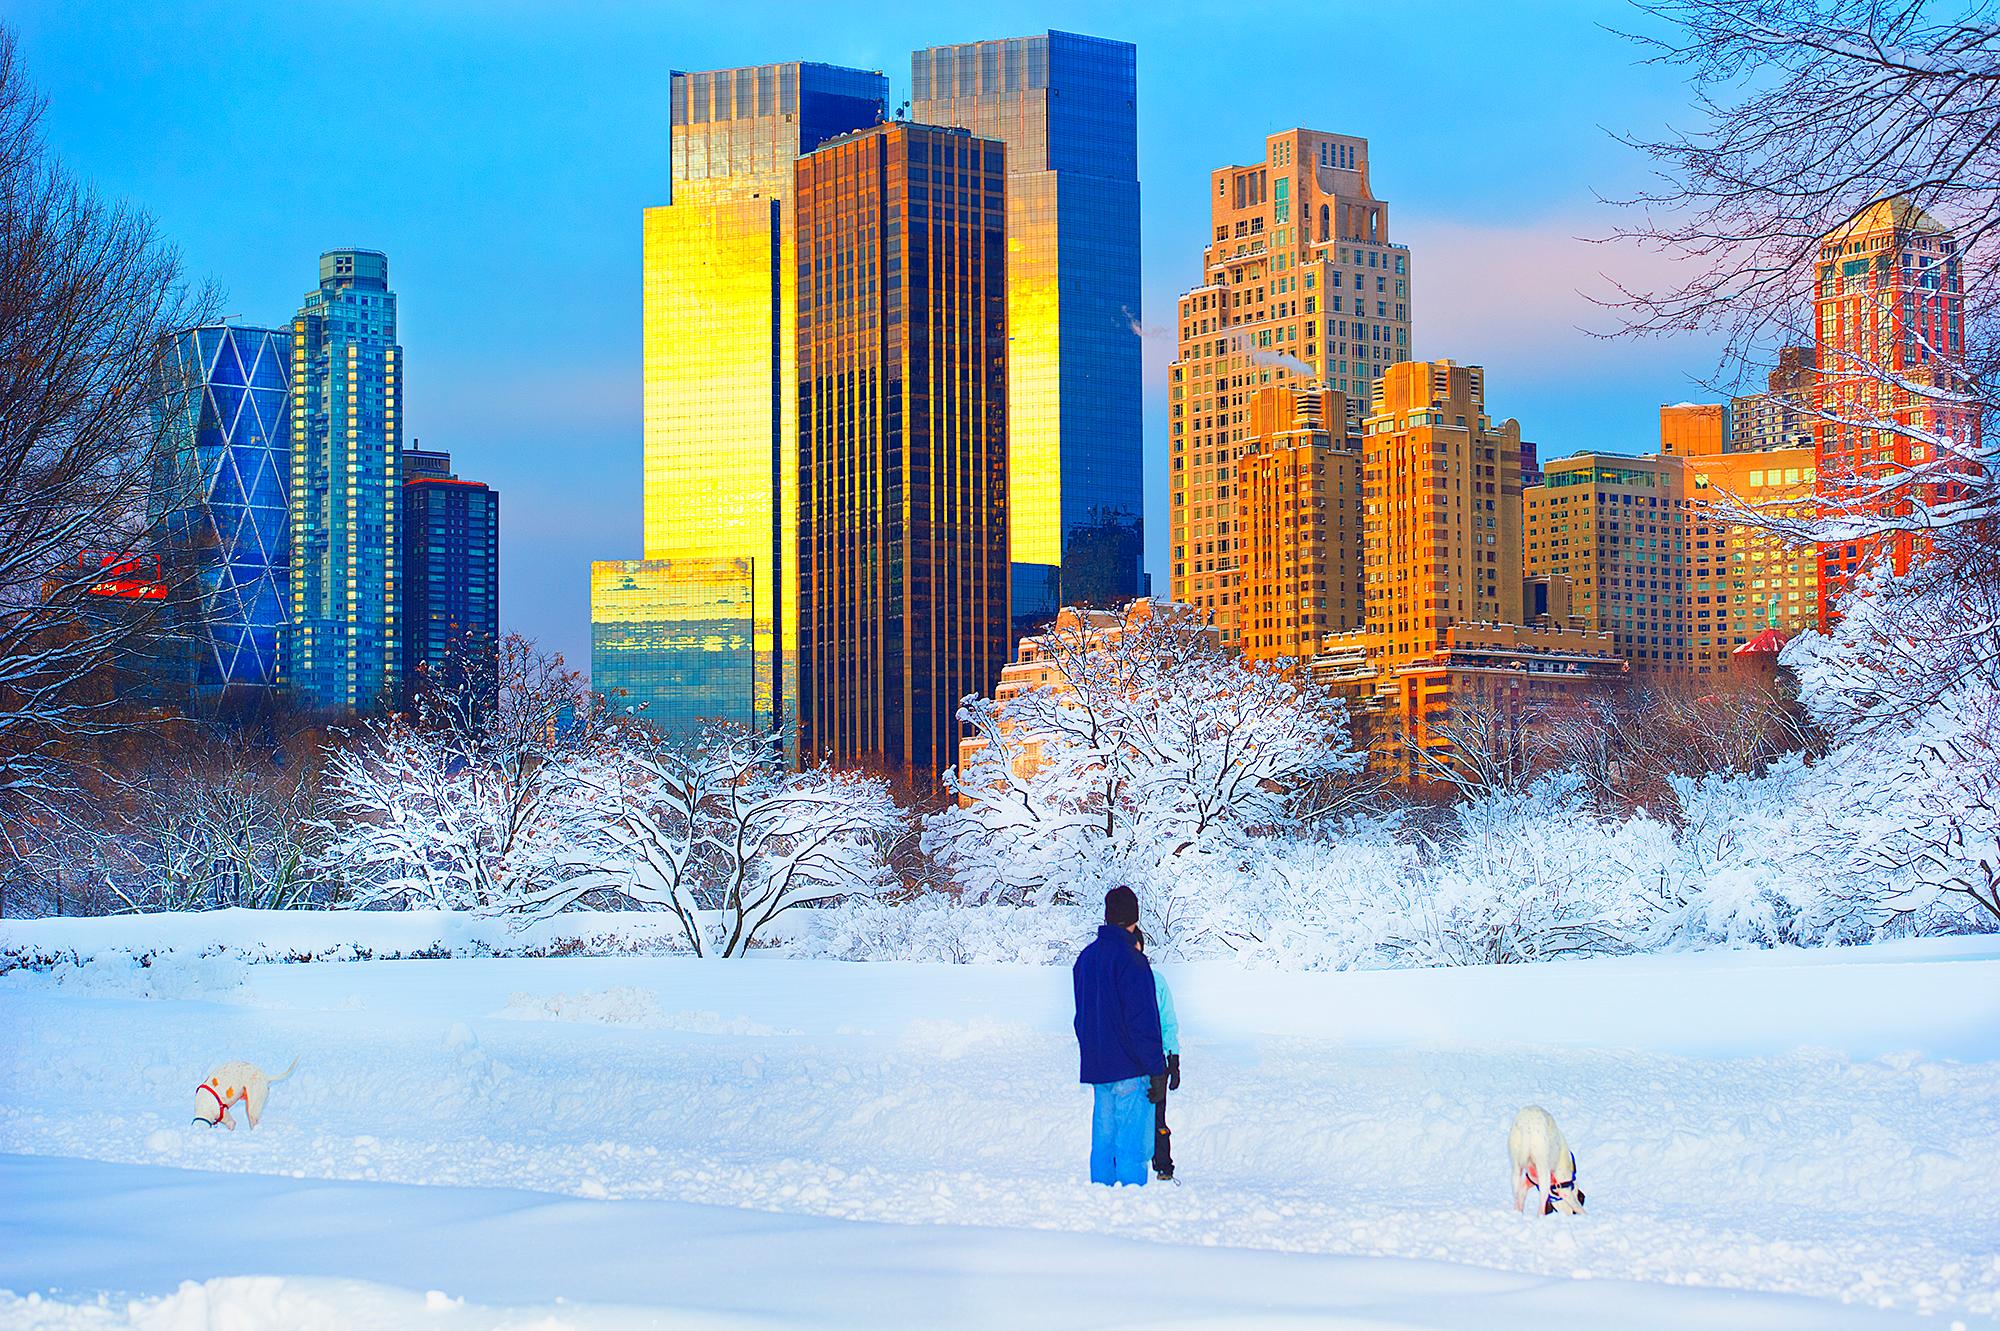 Mitchell Funk Landscape Photograph - Snowfall in Central Park with Dogs in Snow, Architecture 